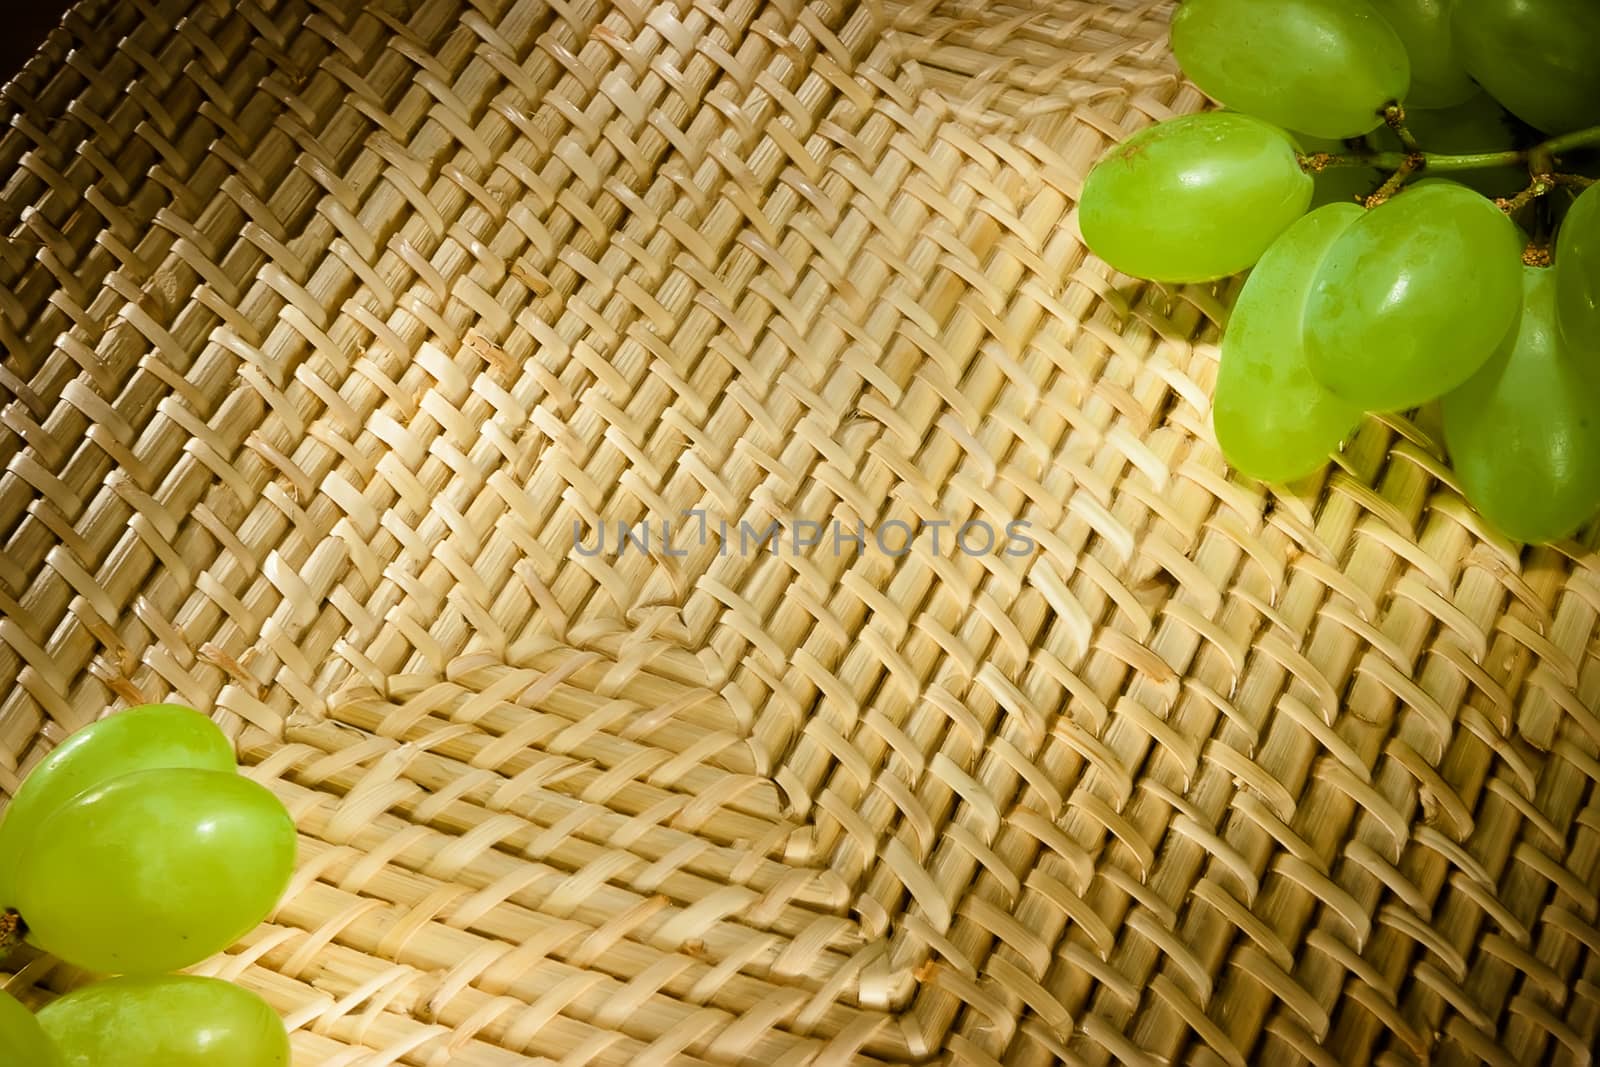 Background. The Frame. Wicker texture with green grapes on the corners